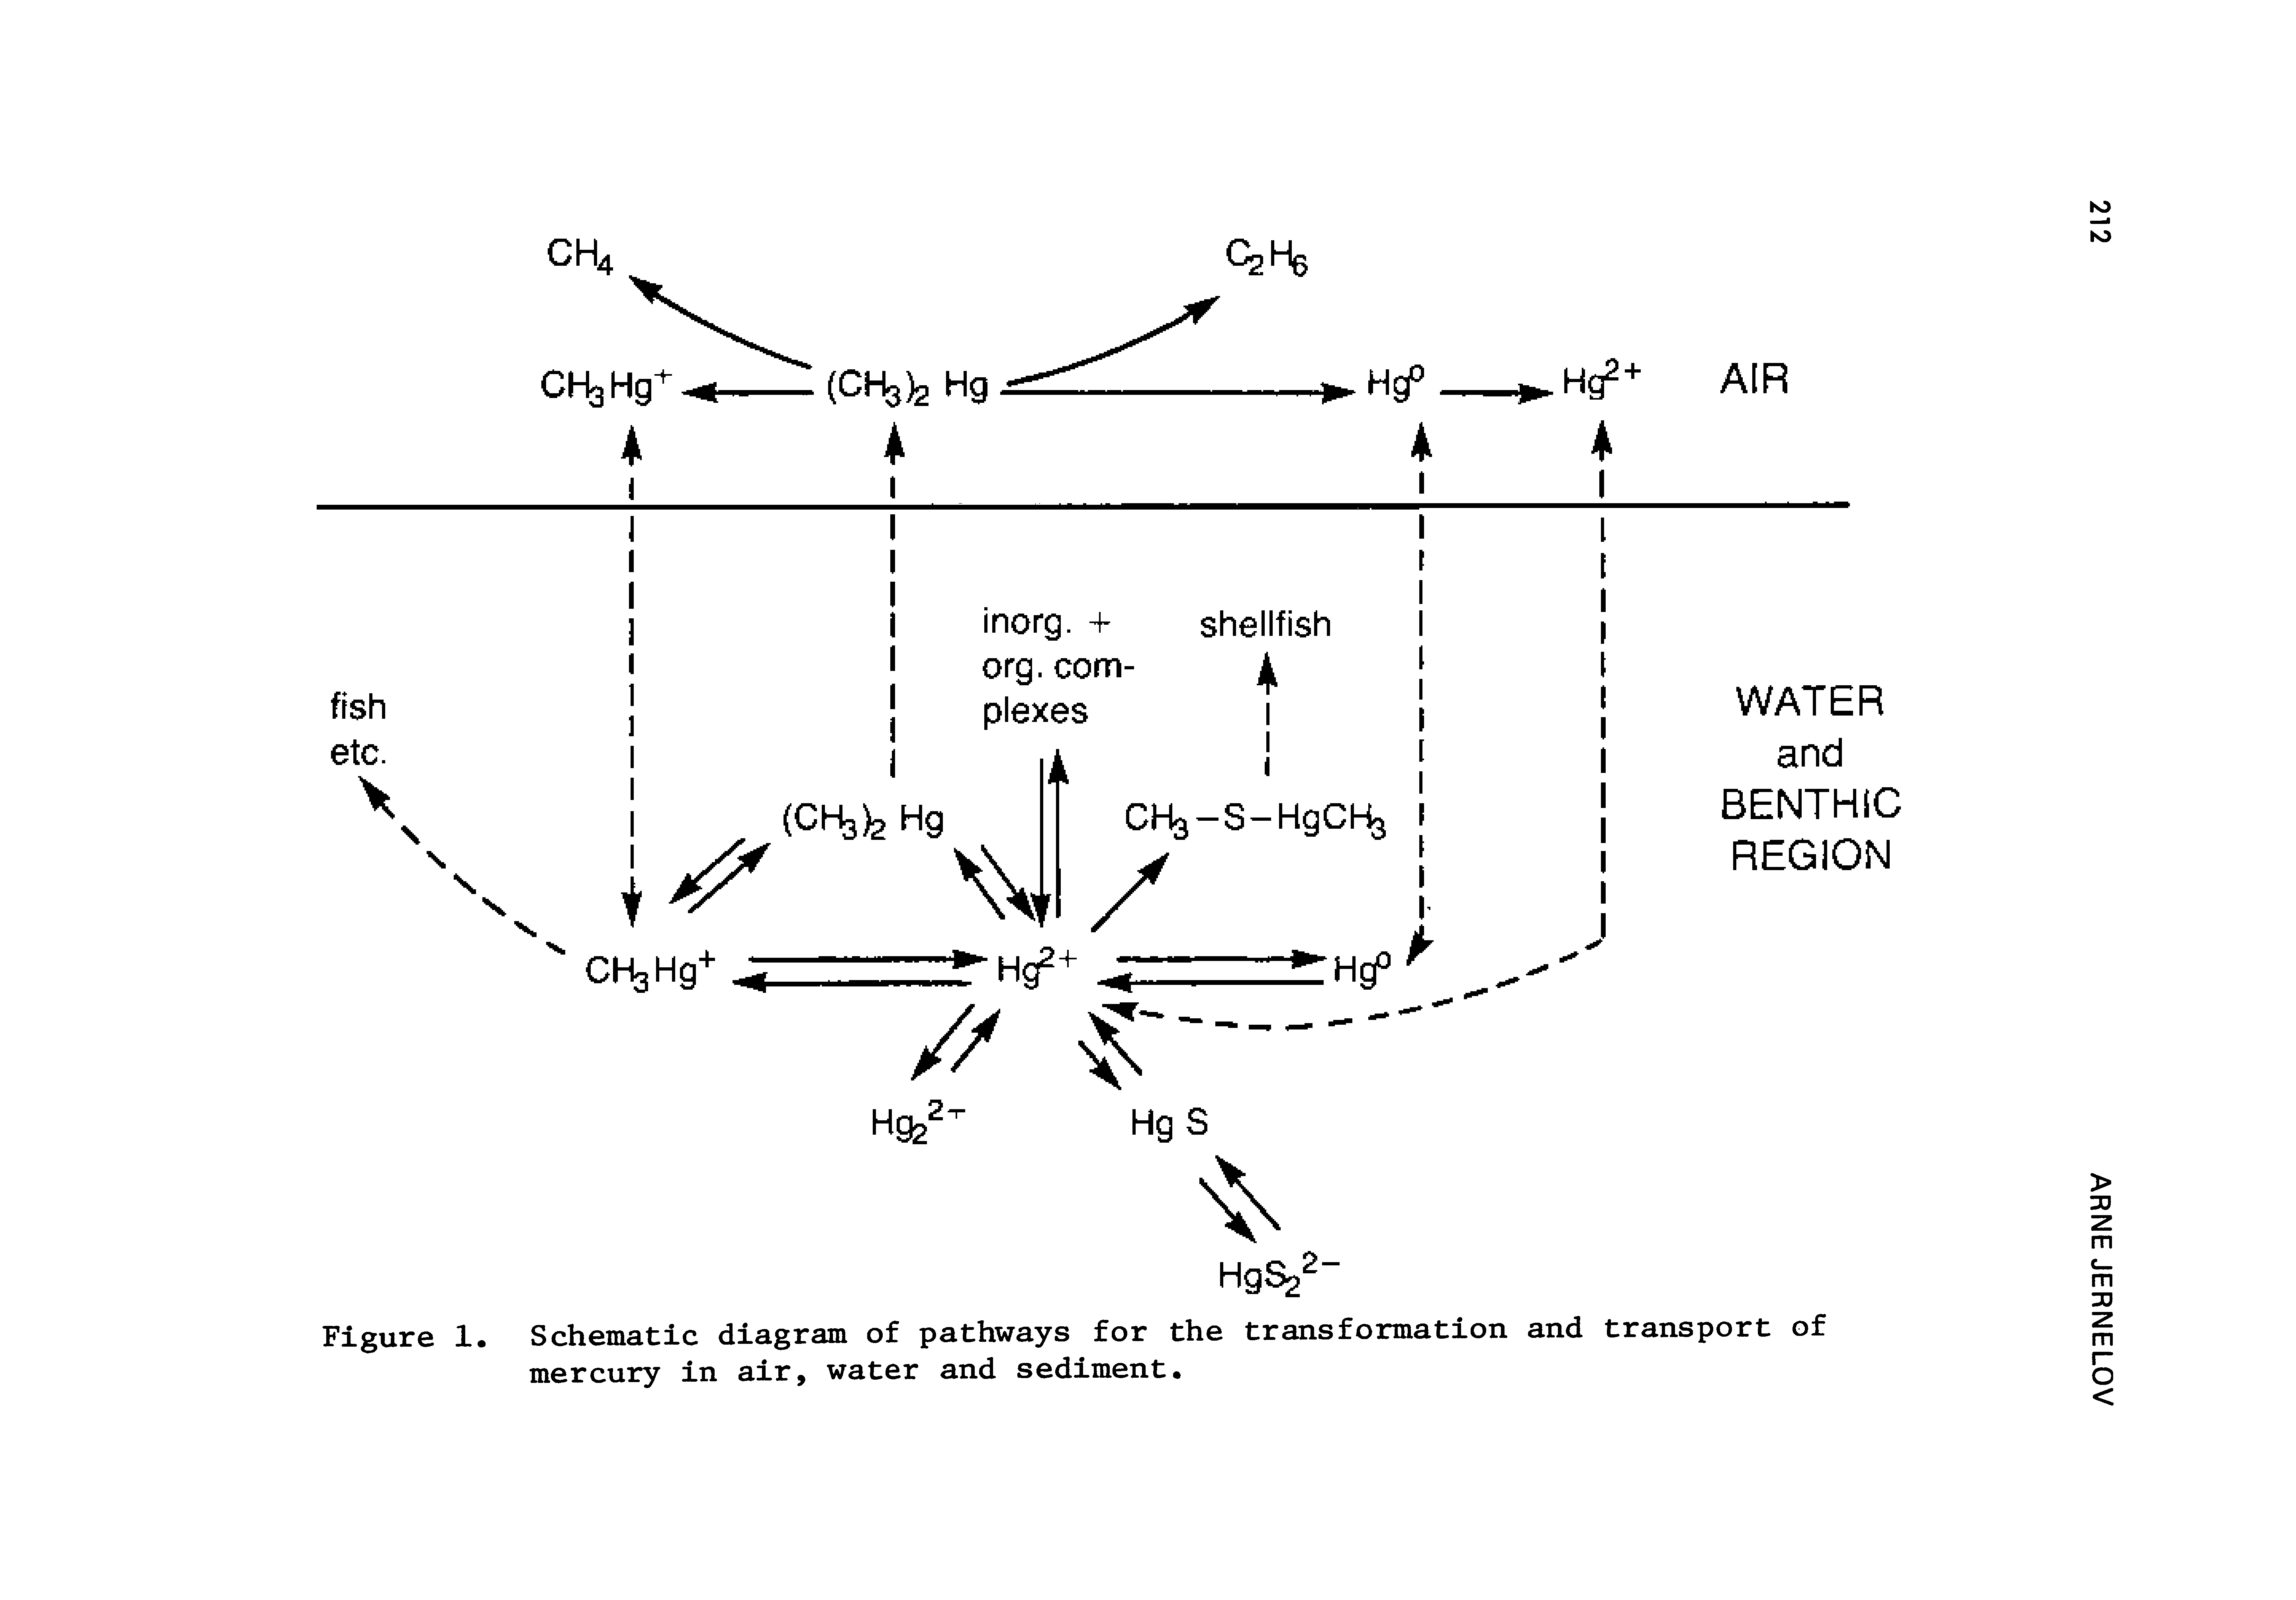 Figure 1. Schematic diagram of pathways for the transformation and transport of mercury in air, water and sediment.